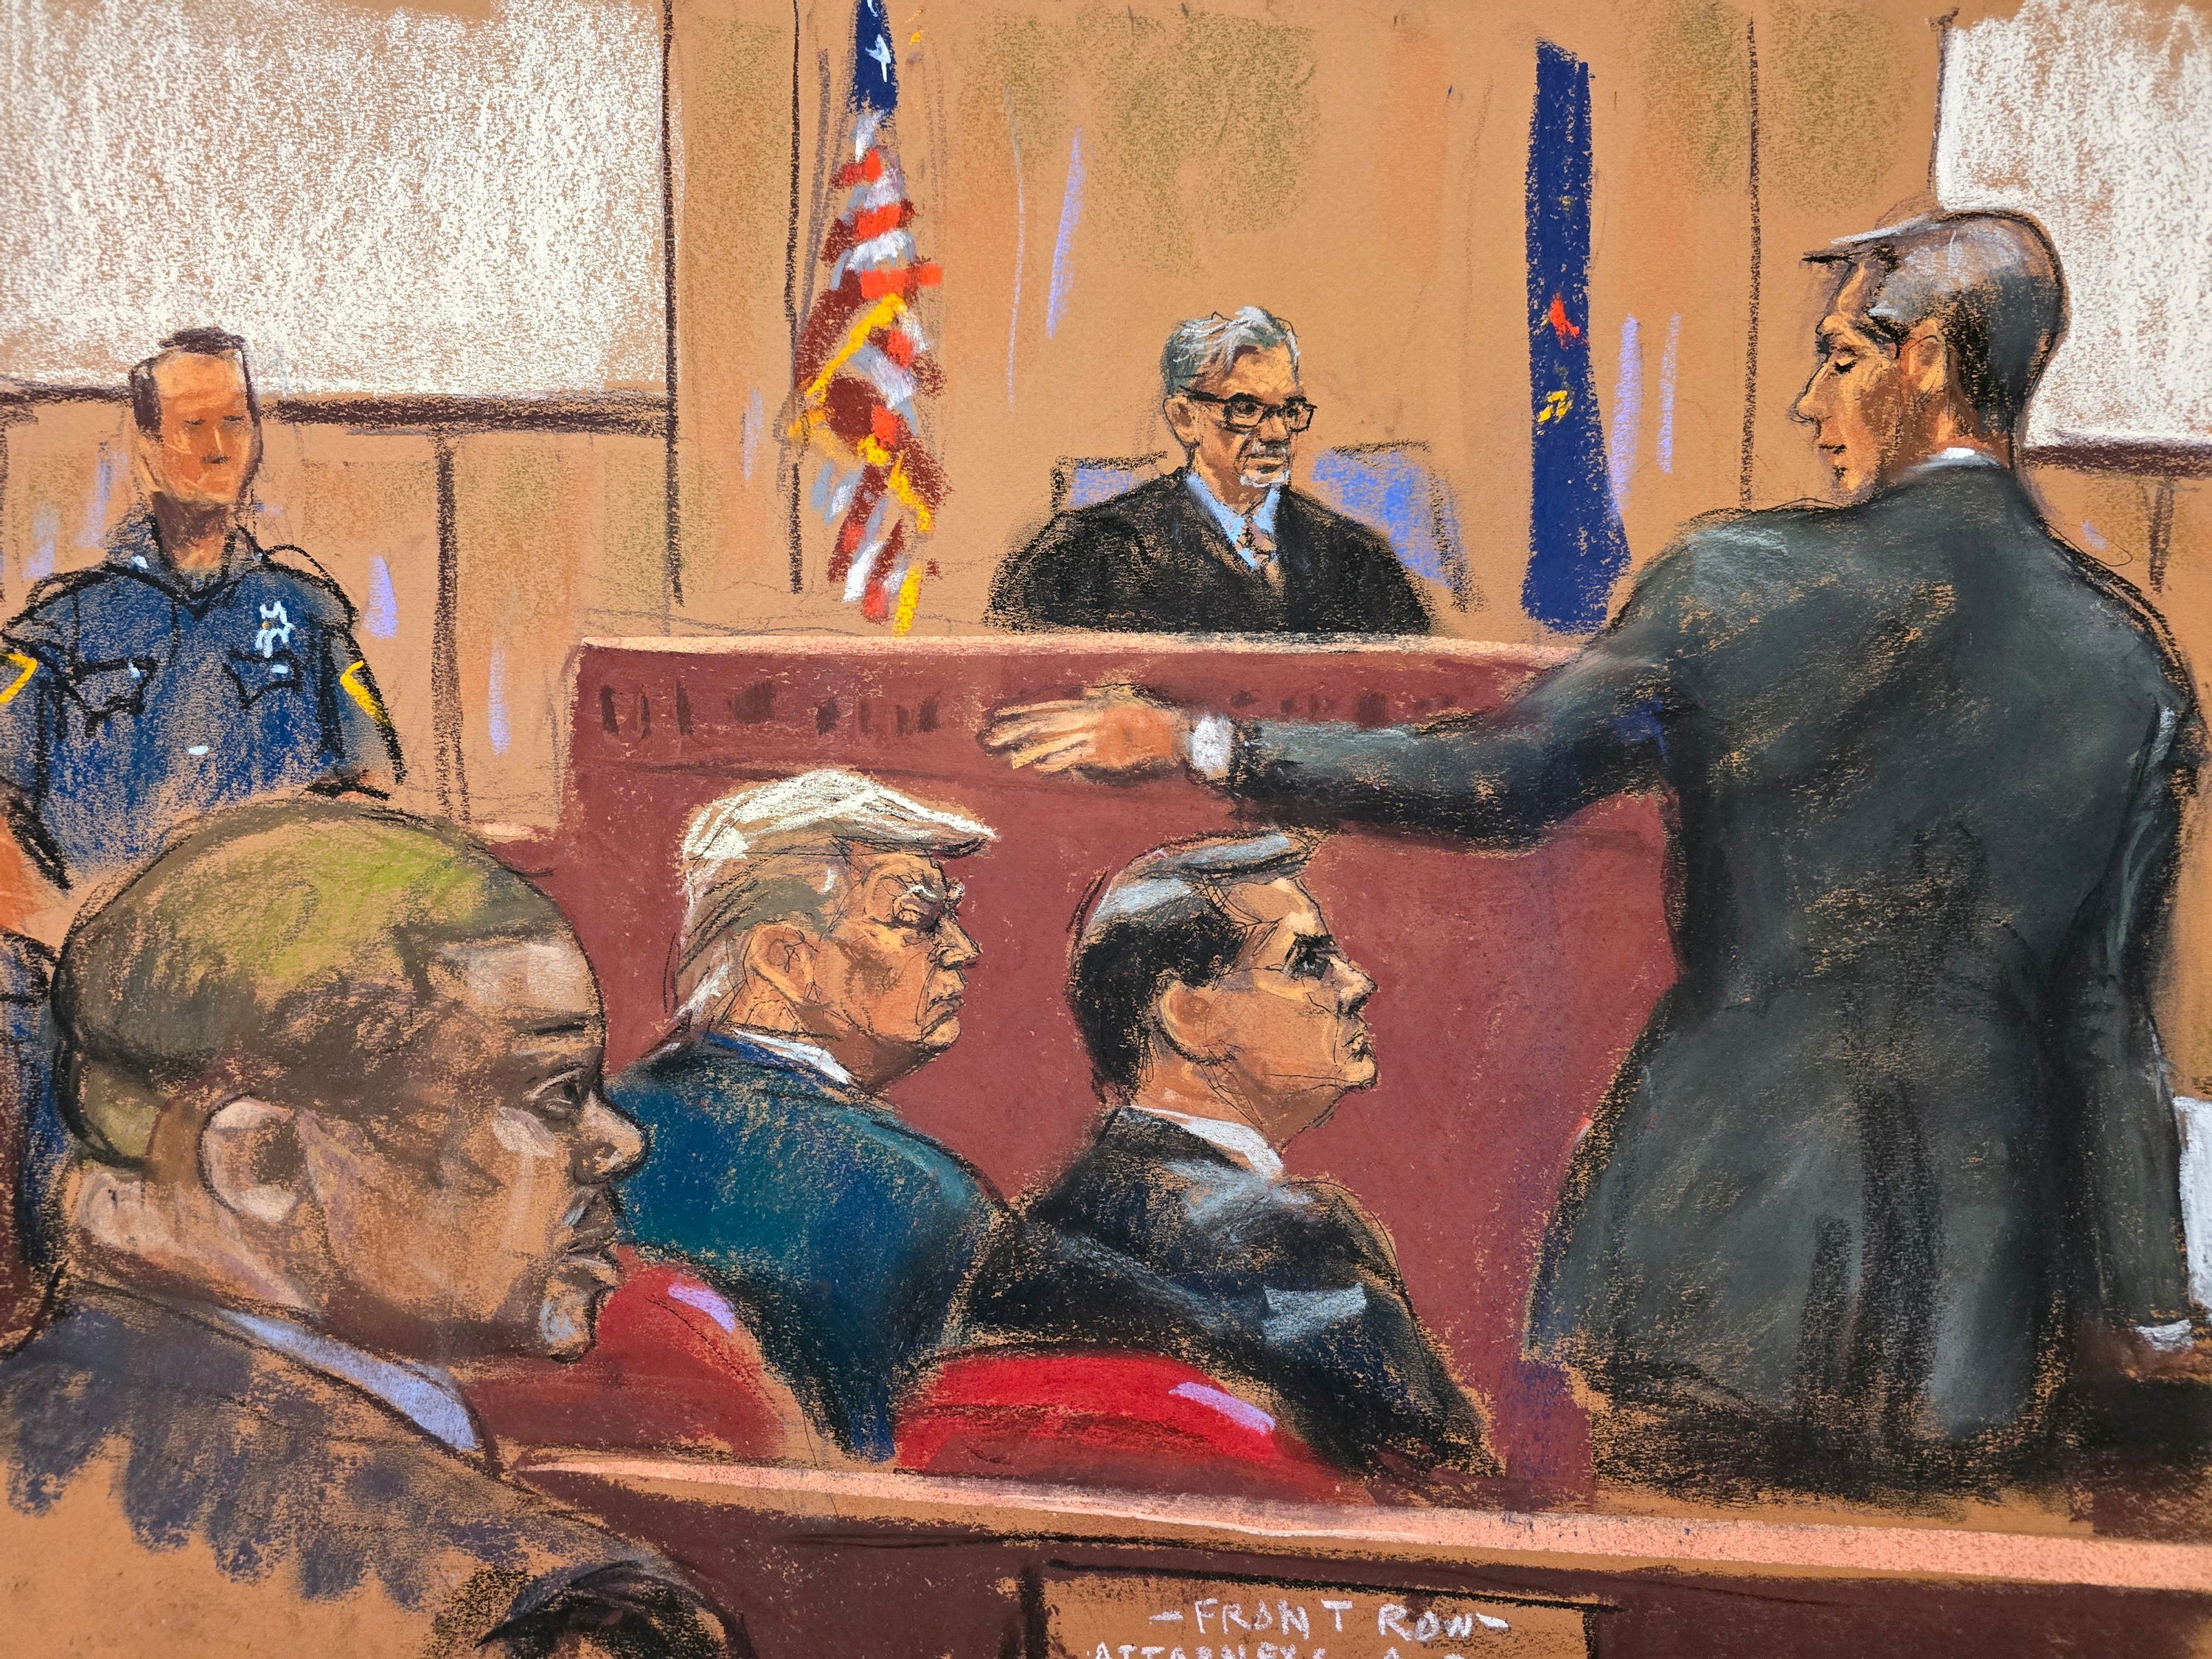 A courtroom sketch depicts Donald Trump sitting with his attorney Todd Blanche while Manhattan prosecutor Matthew Colangelo delivers opening statements on 22 April